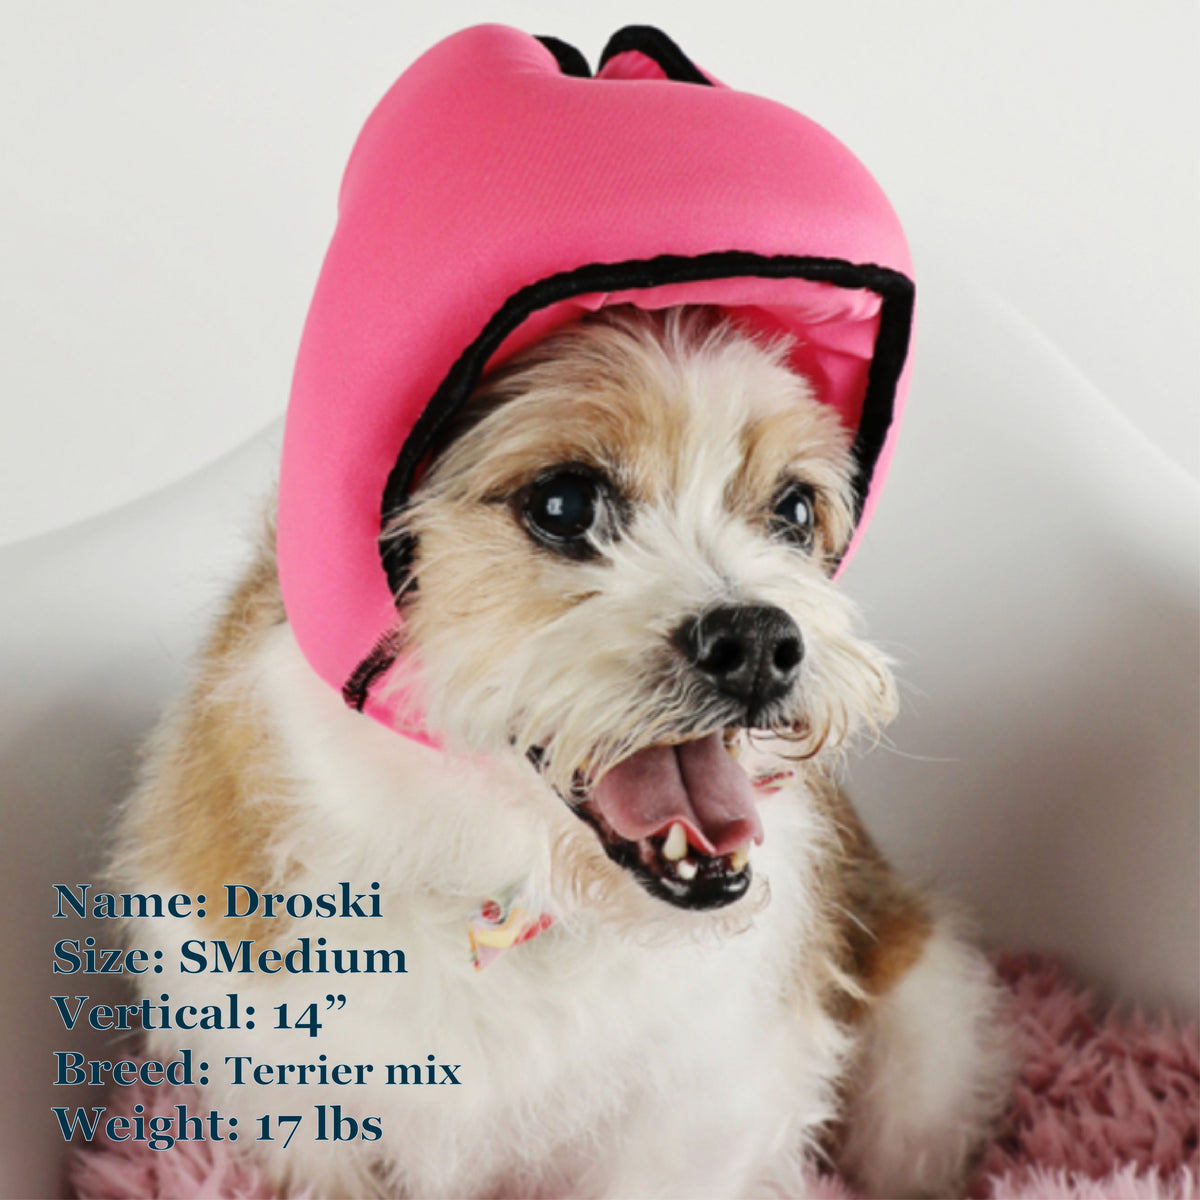 Droski is a Terrier Mix in a SMedium Pink PAWNIX Noise Cancelling Headset for dogs